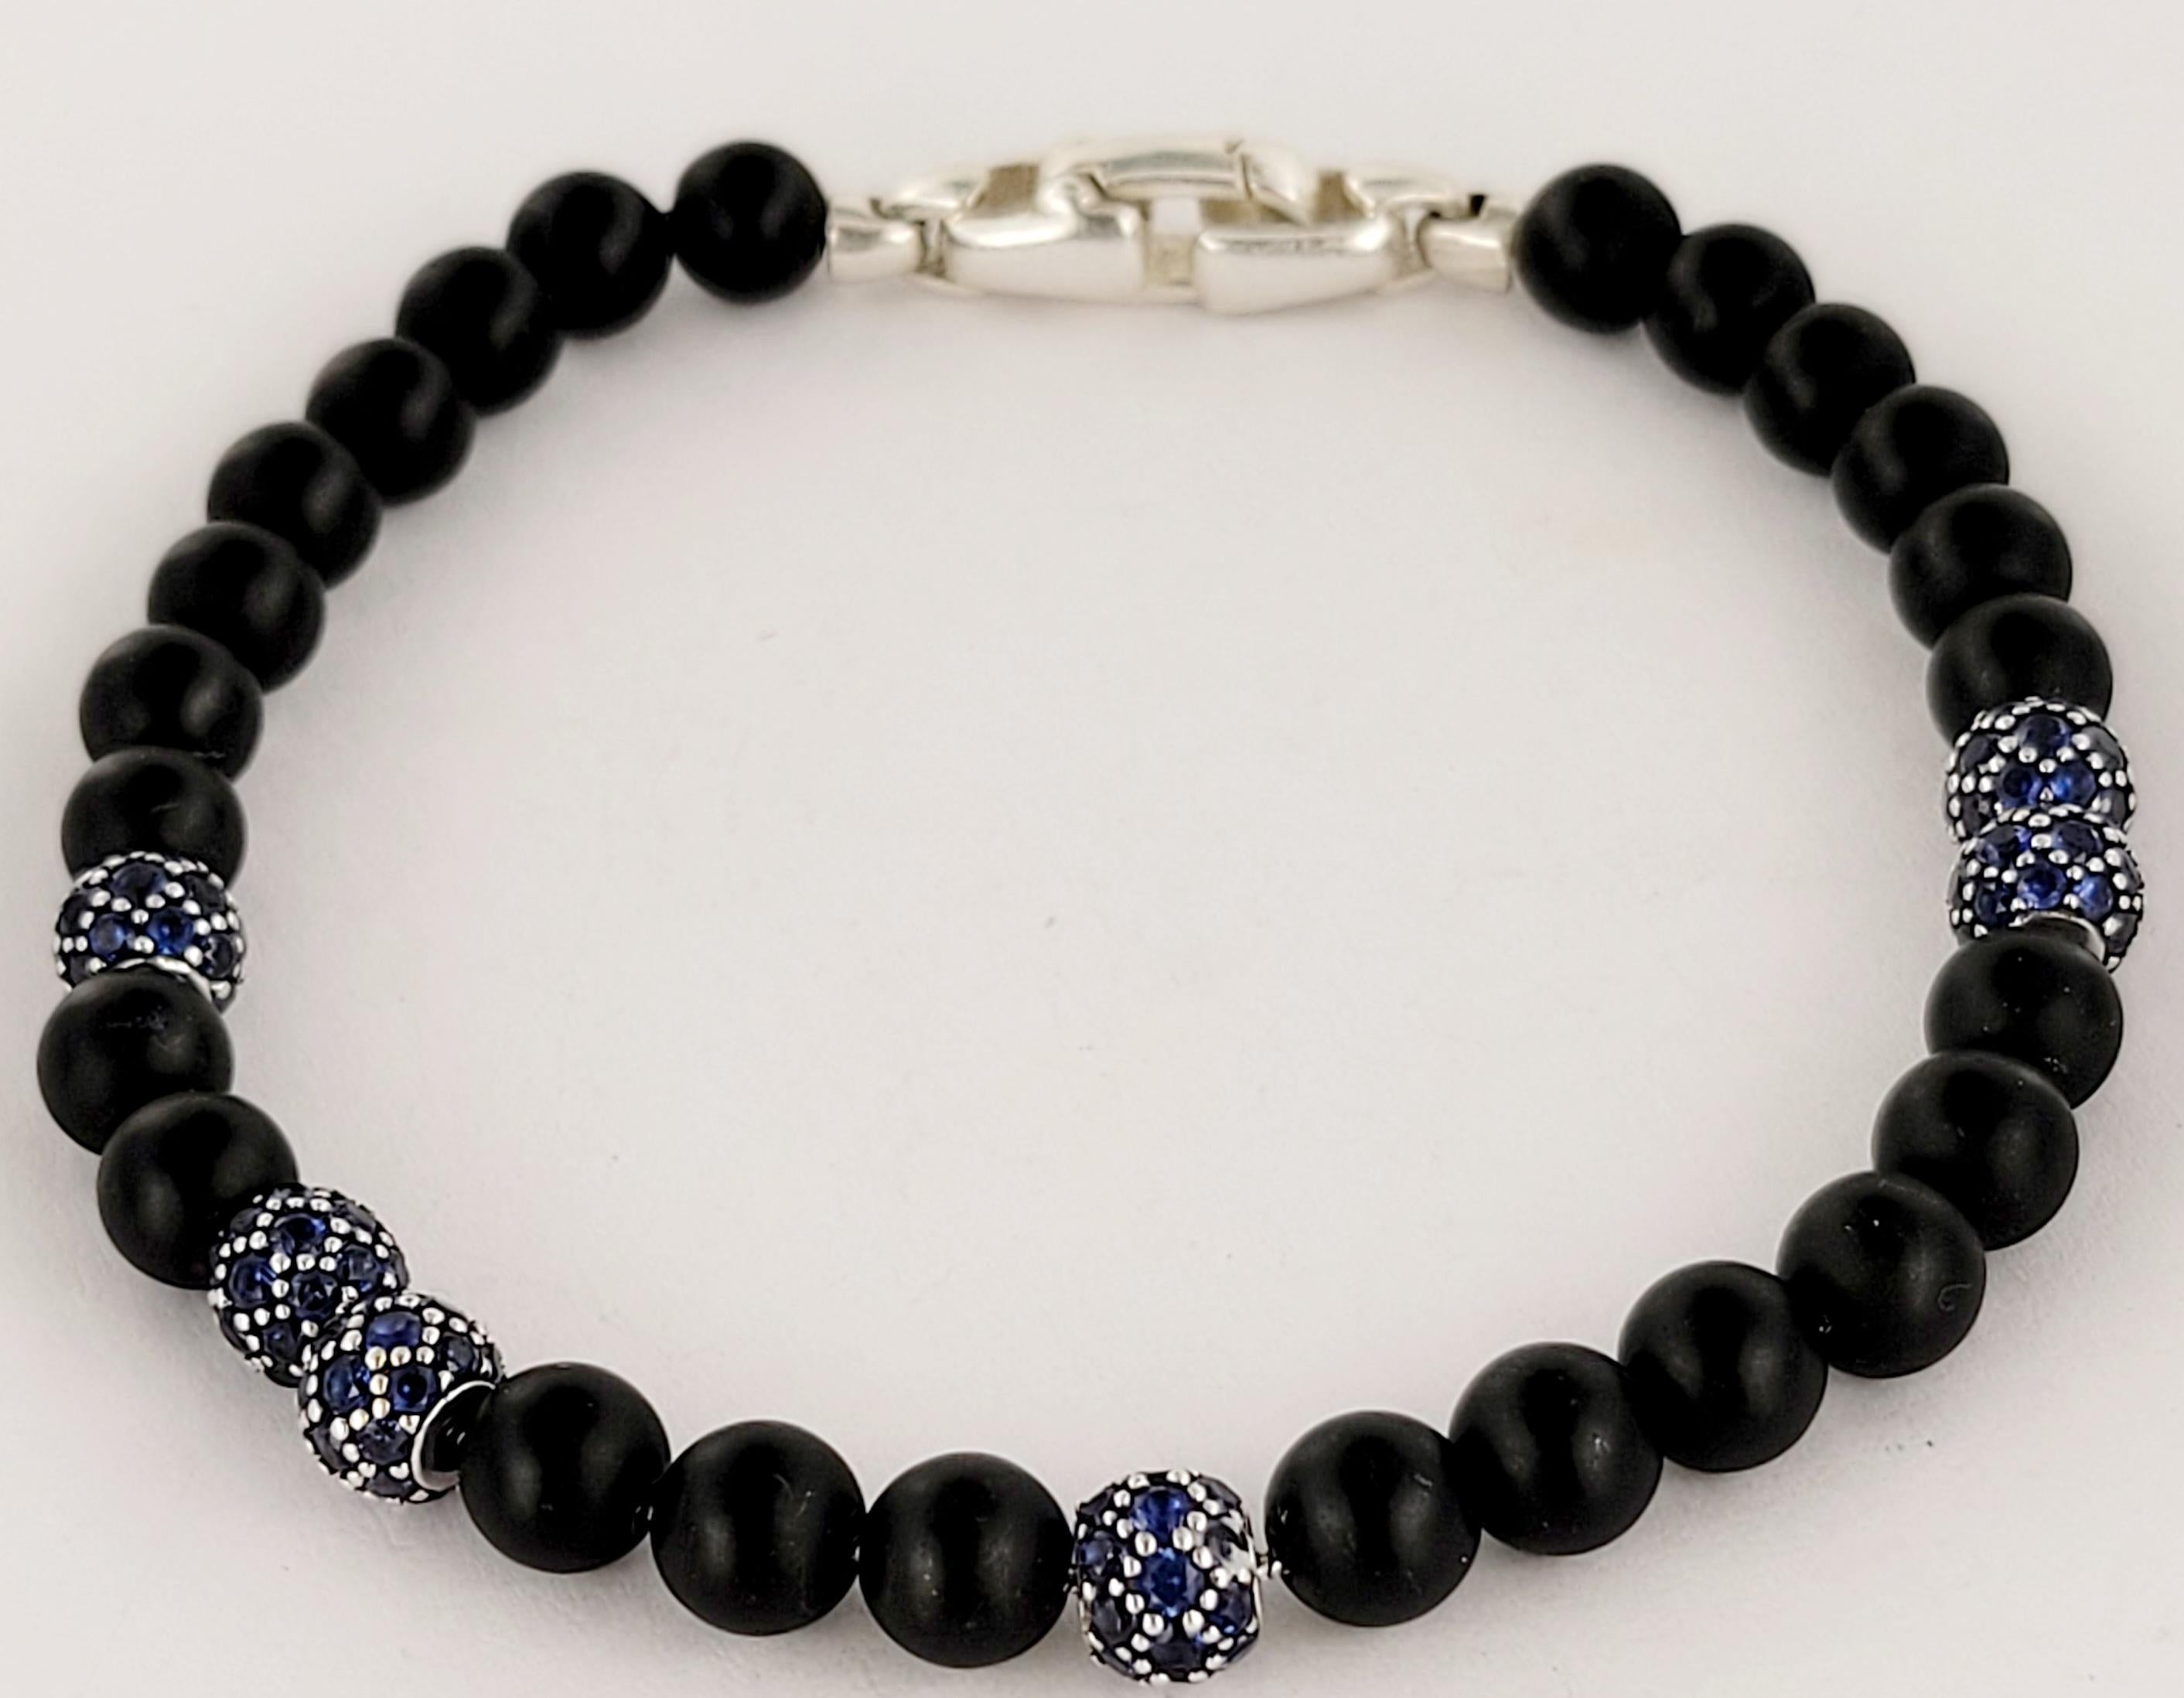 David Yurman 
Sterling silver
Black onyx
Pave-set sapphires, 0.69 total carat weight
Bracelet, 6mm
Push Clasp
Bracelet Length 8.5'' Long From end to end 
Condition New, never worn
Comes with David Yurman Bracelet Box